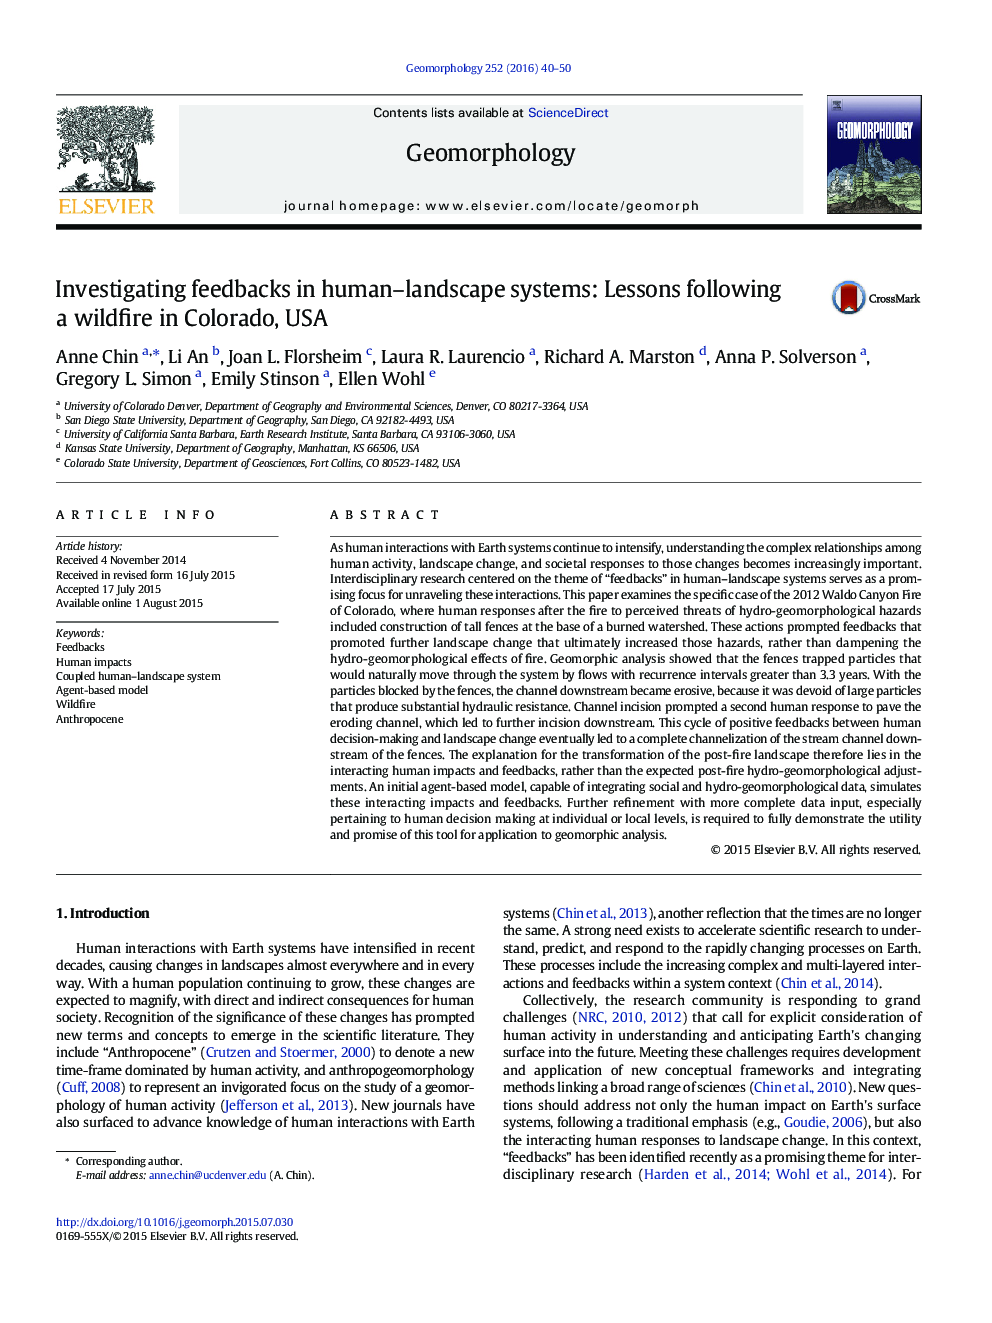 Investigating feedbacks in human–landscape systems: Lessons following a wildfire in Colorado, USA